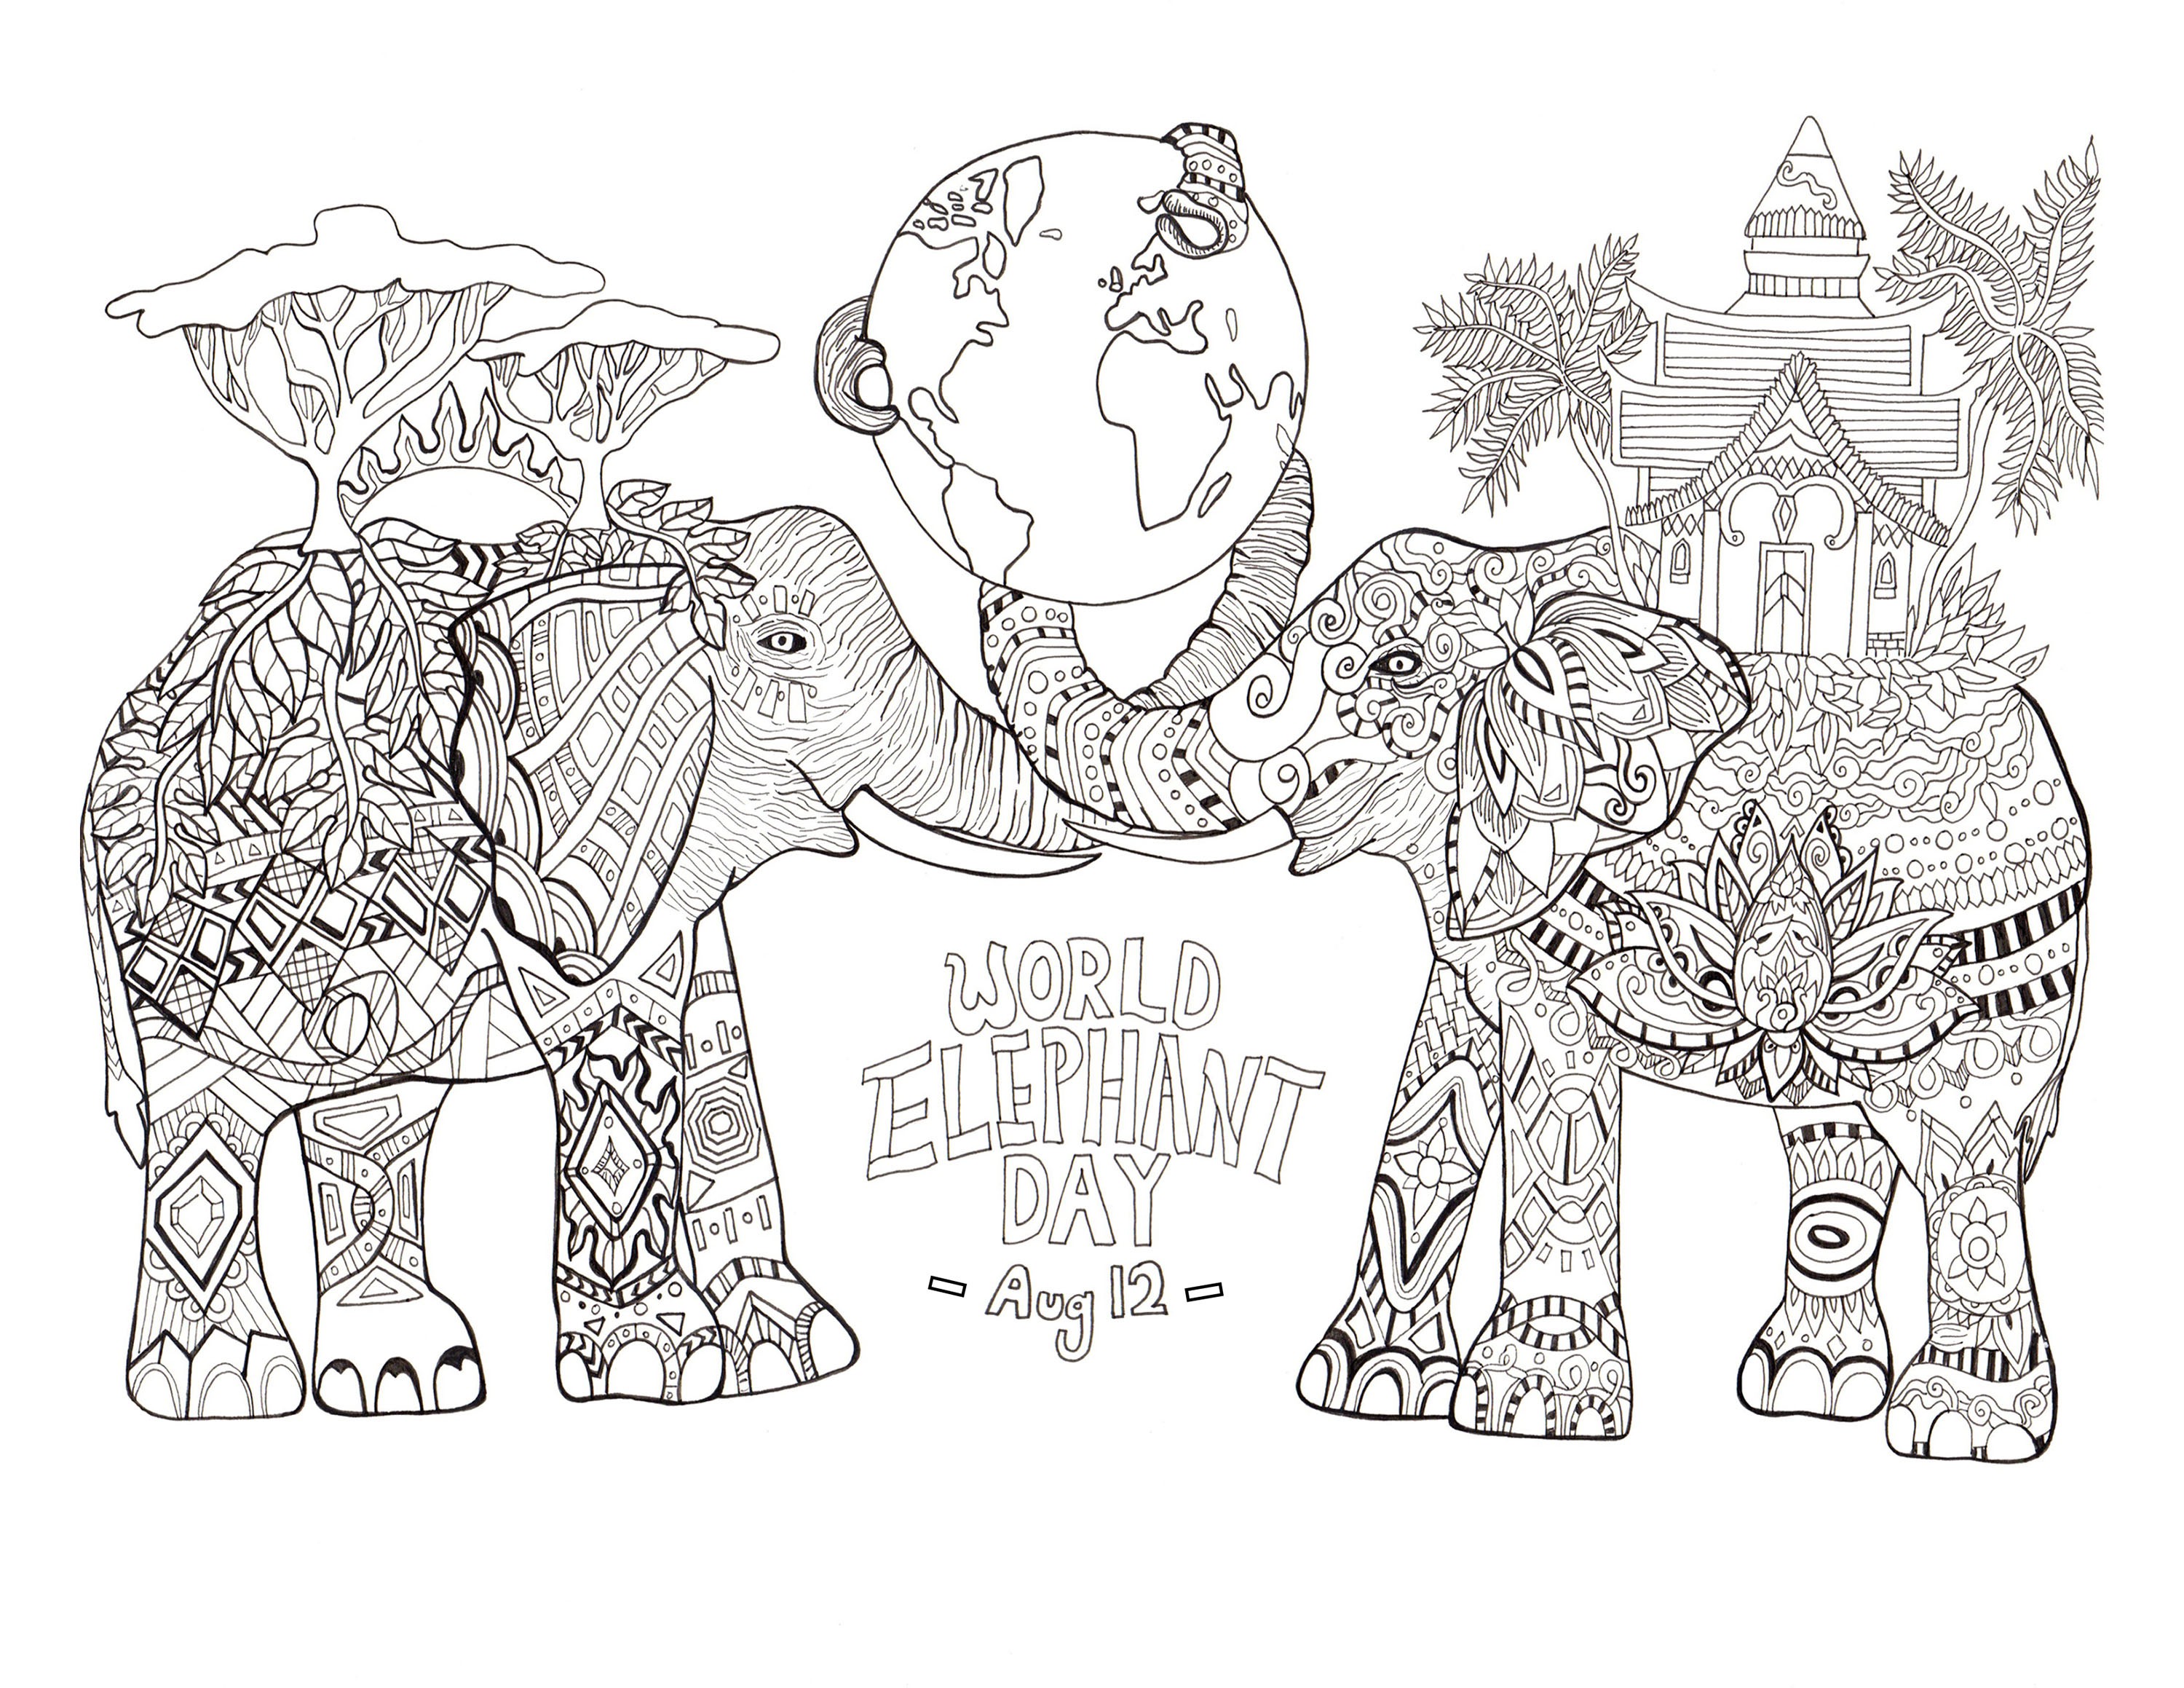 Coloring page drawn by Rylee Postulo for the World Elephant Day Aug 12